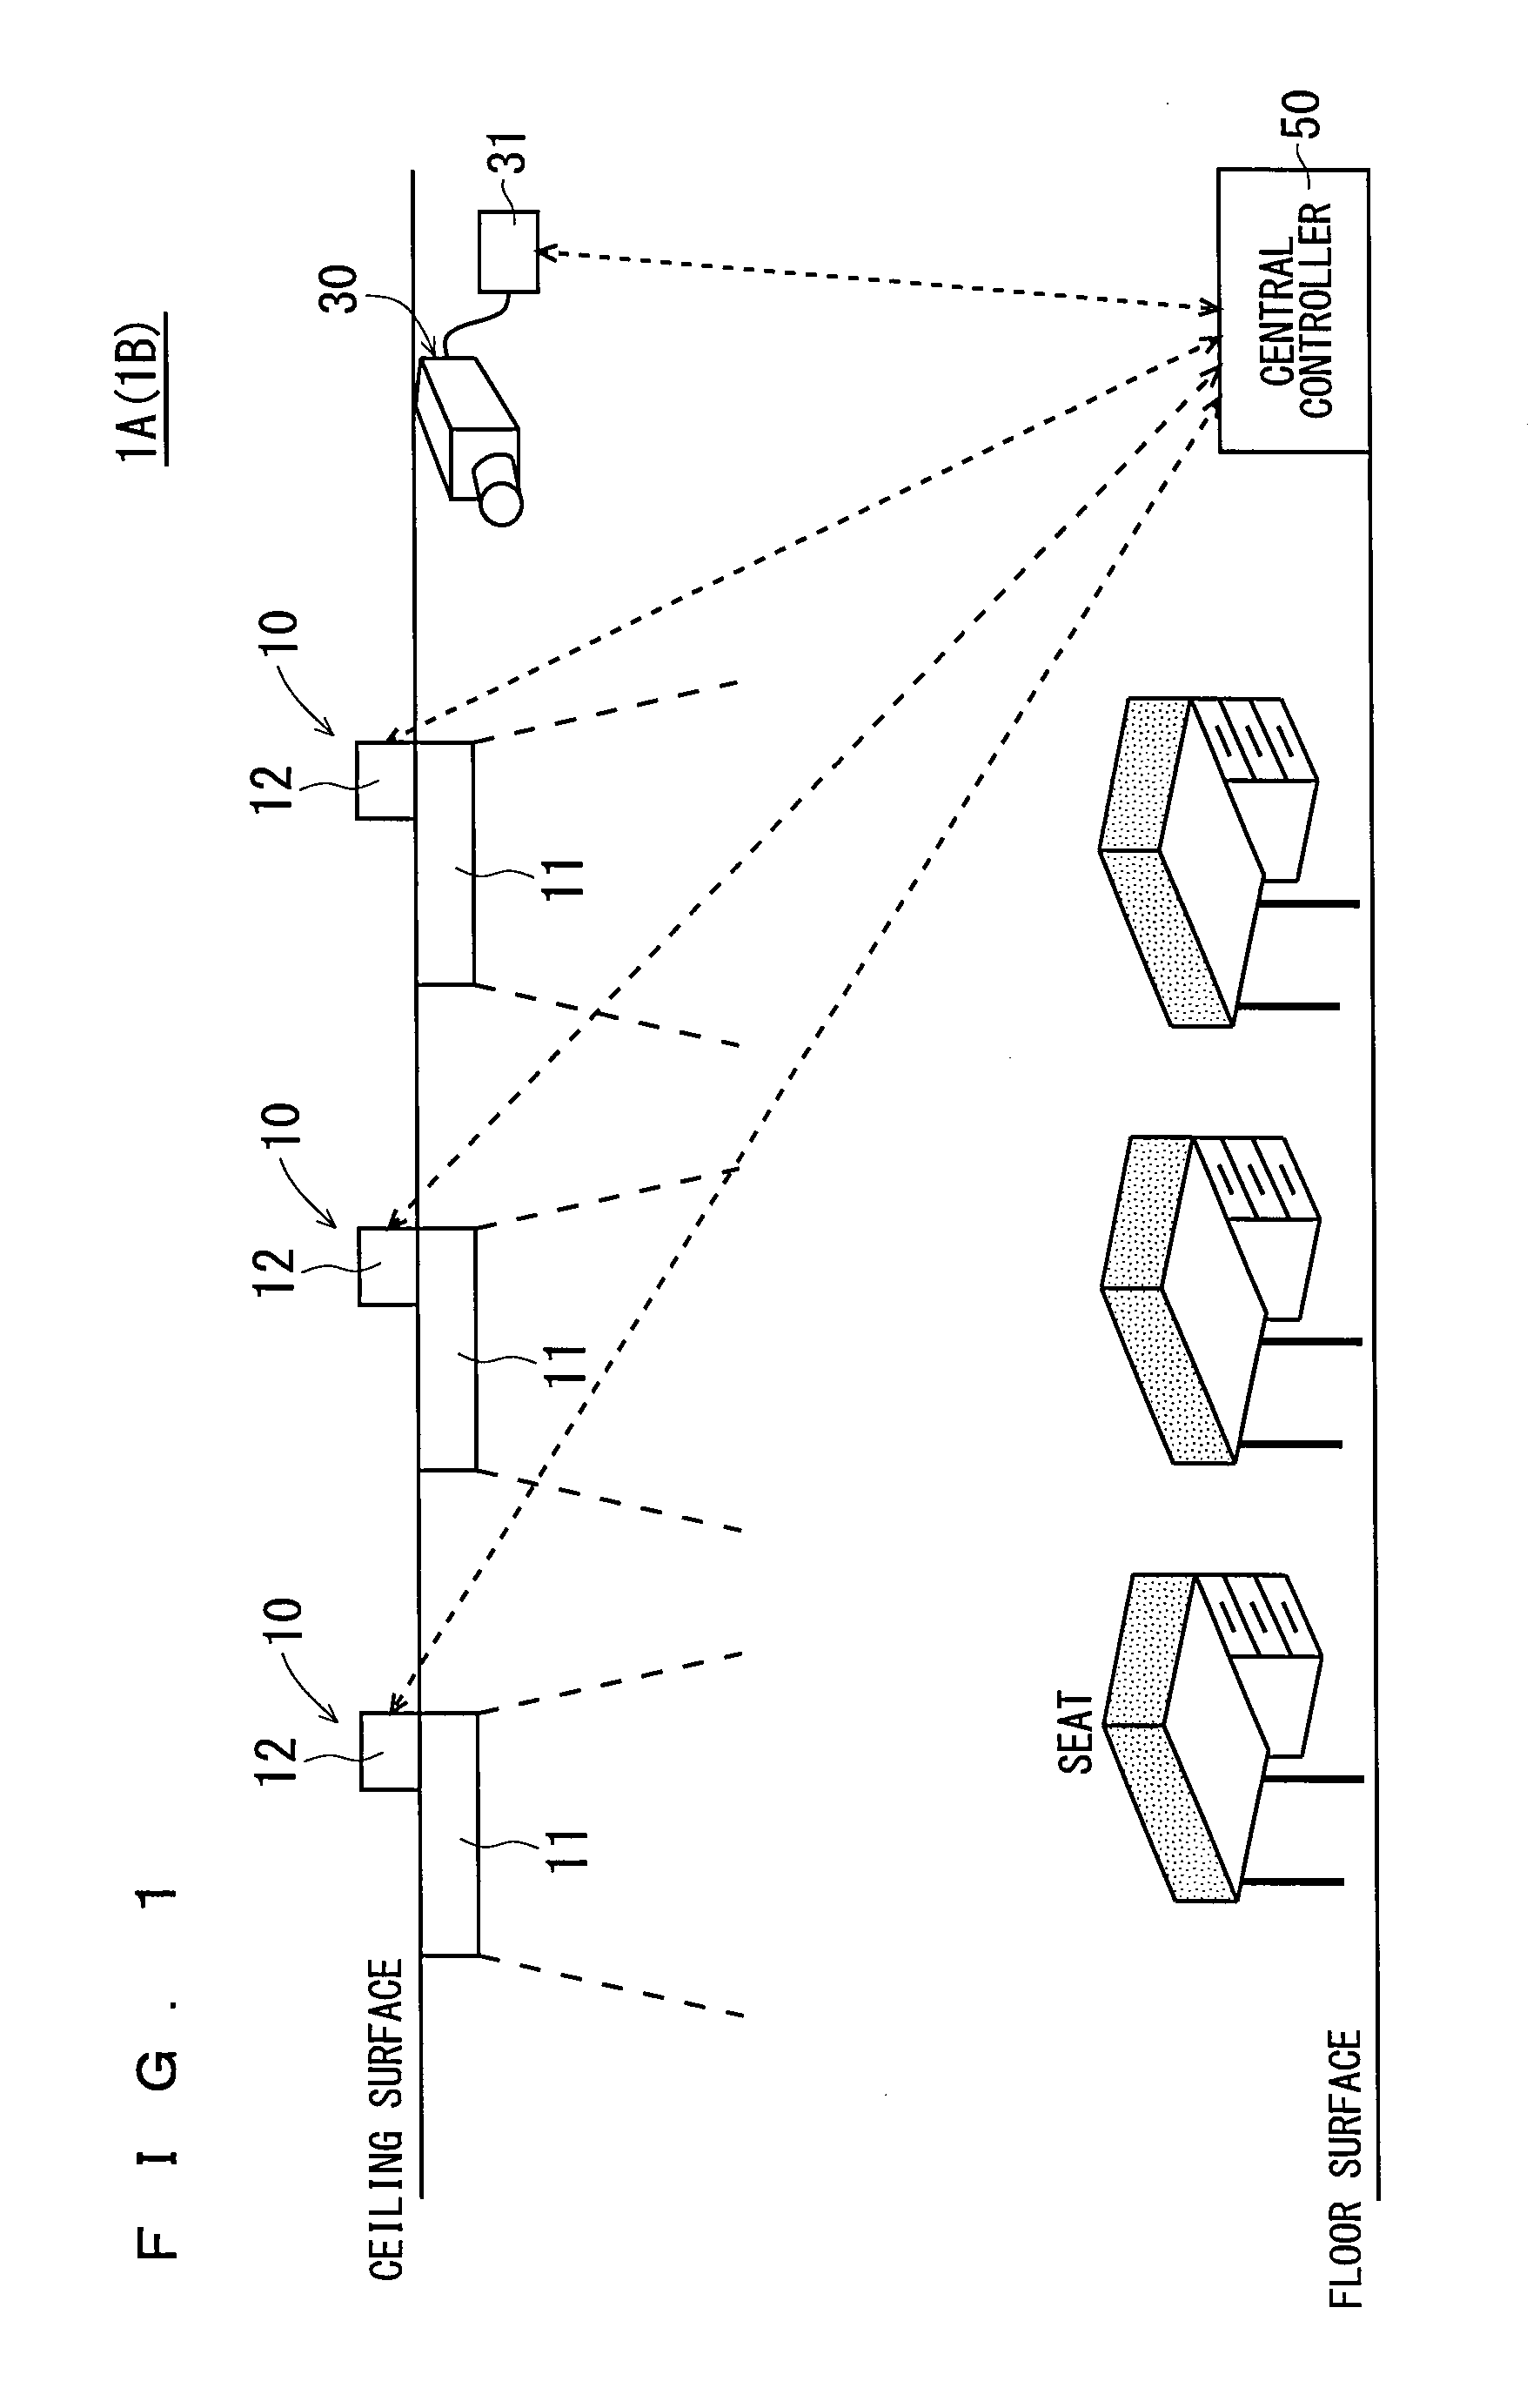 Light control system, light control method and computer readable memory